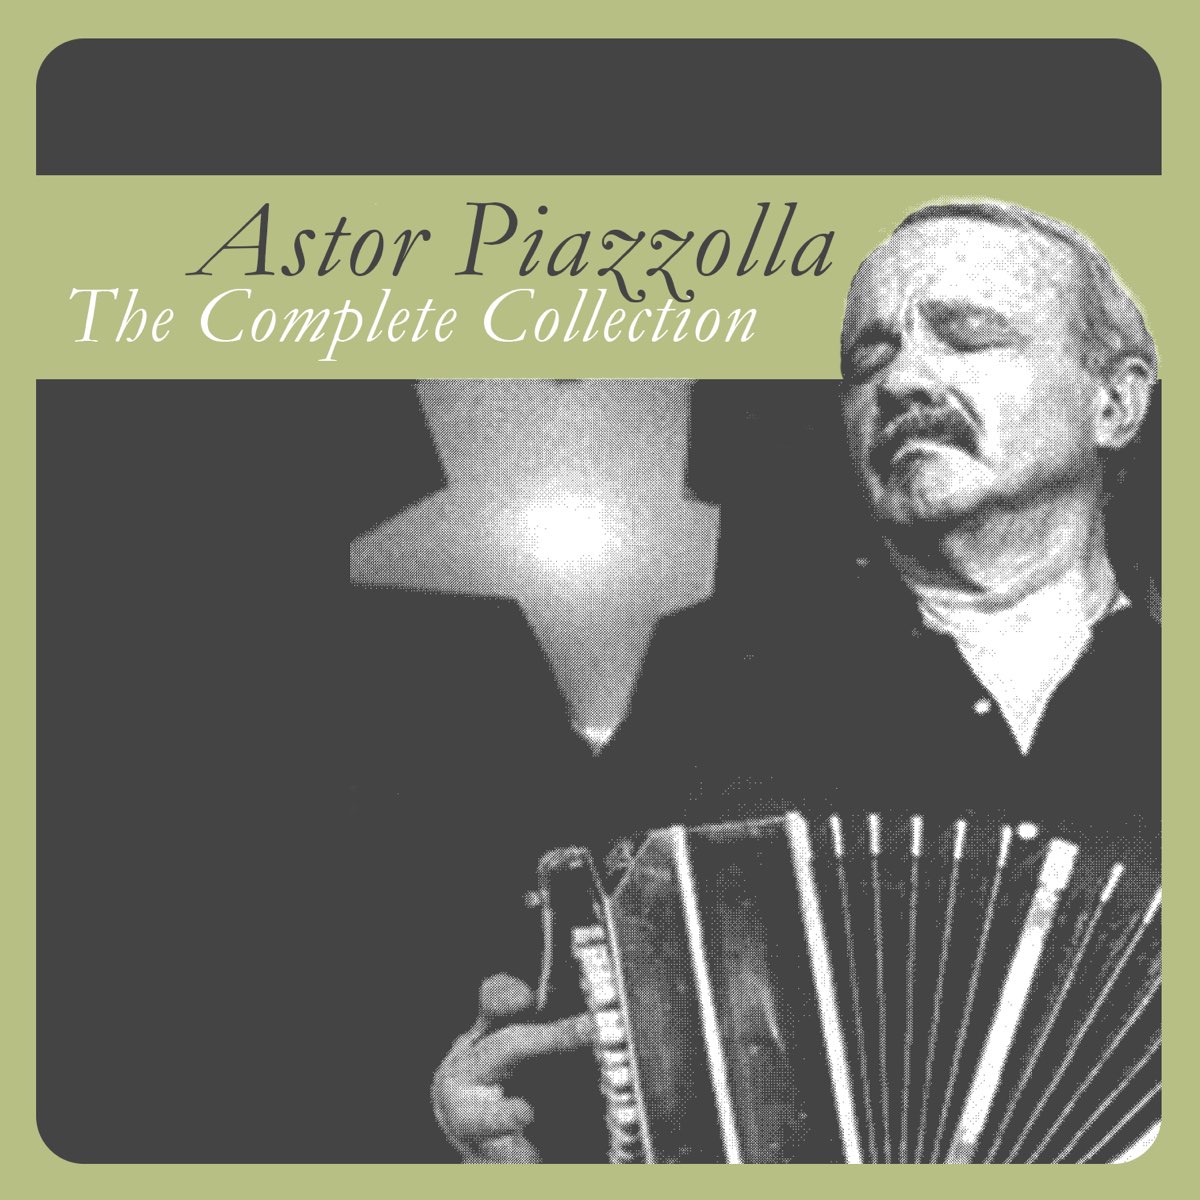 ‎The Complete Collection - Album by Astor Piazzolla - Apple Music